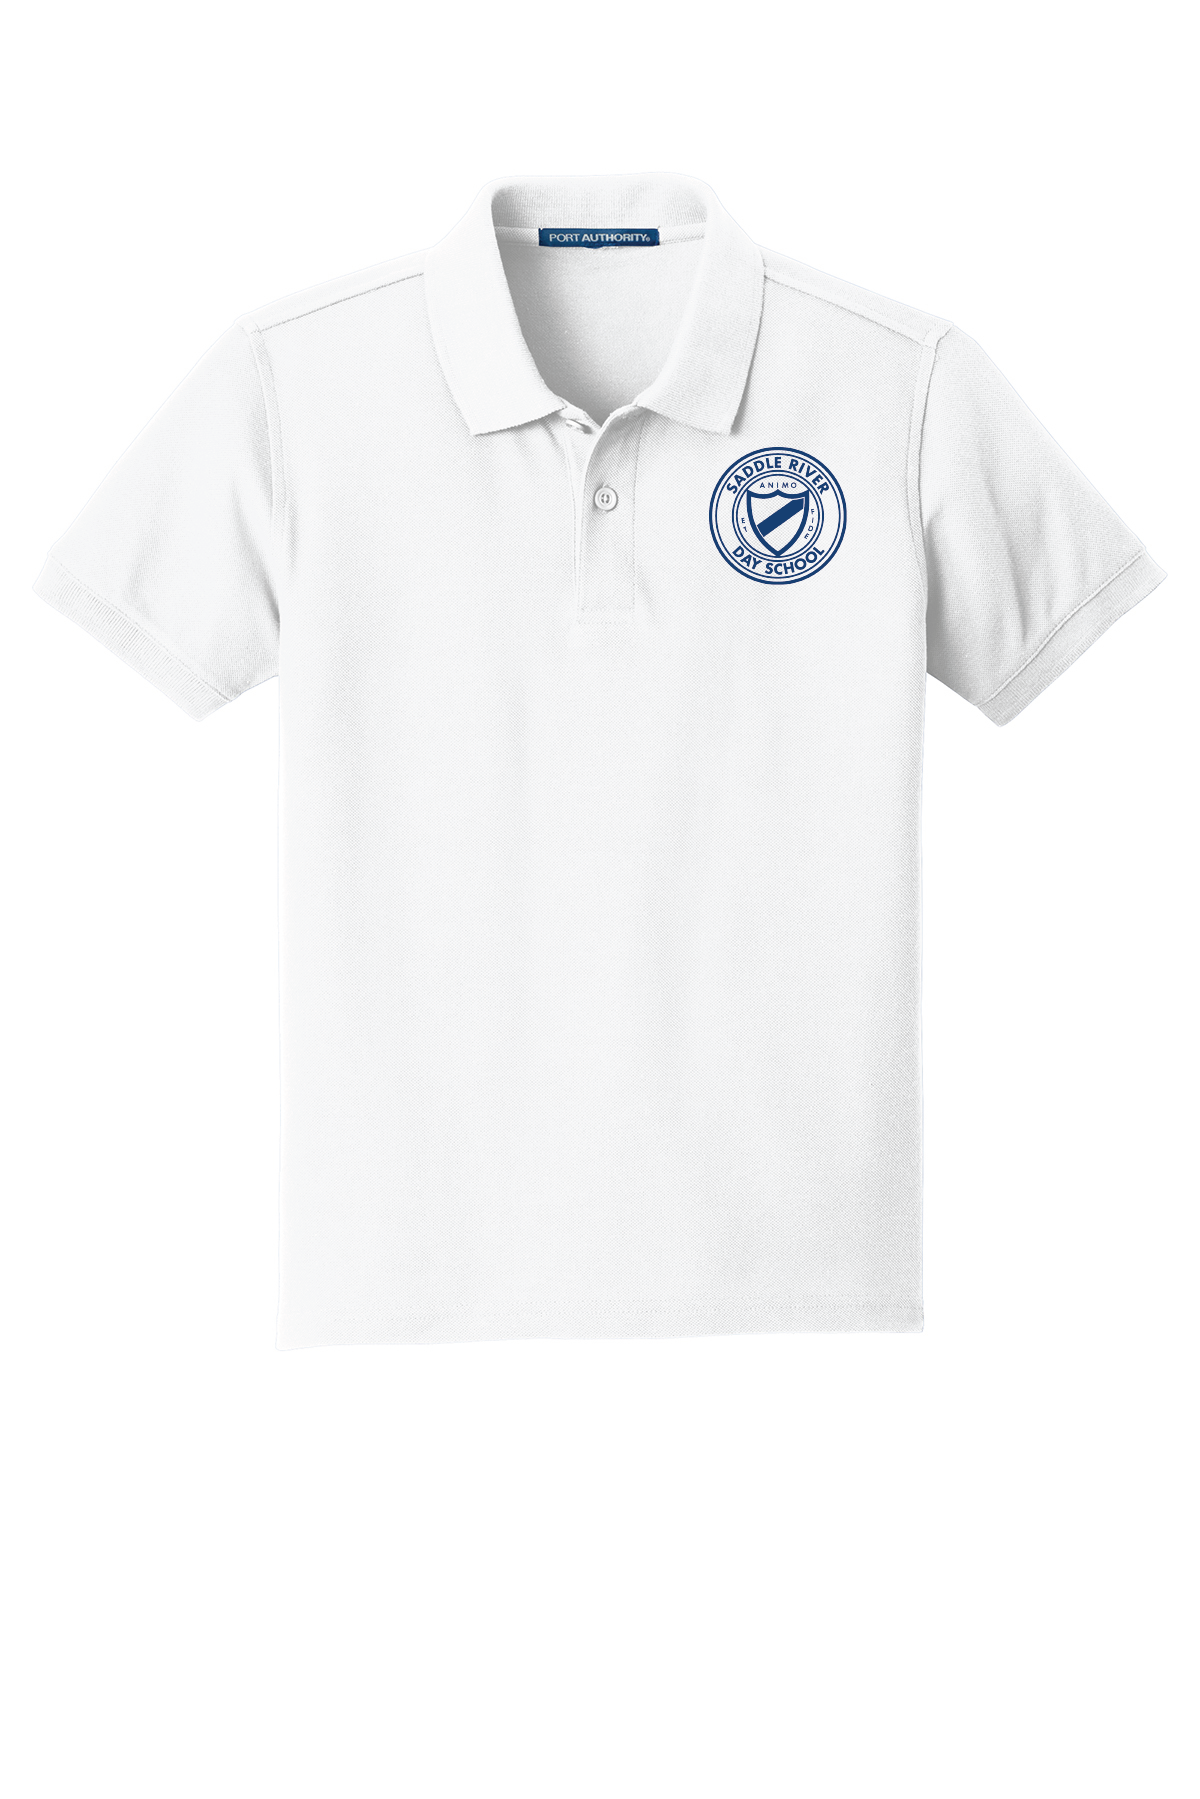 Saddle River Day School Crest Port Authority Youth Core Classic Pique Polo